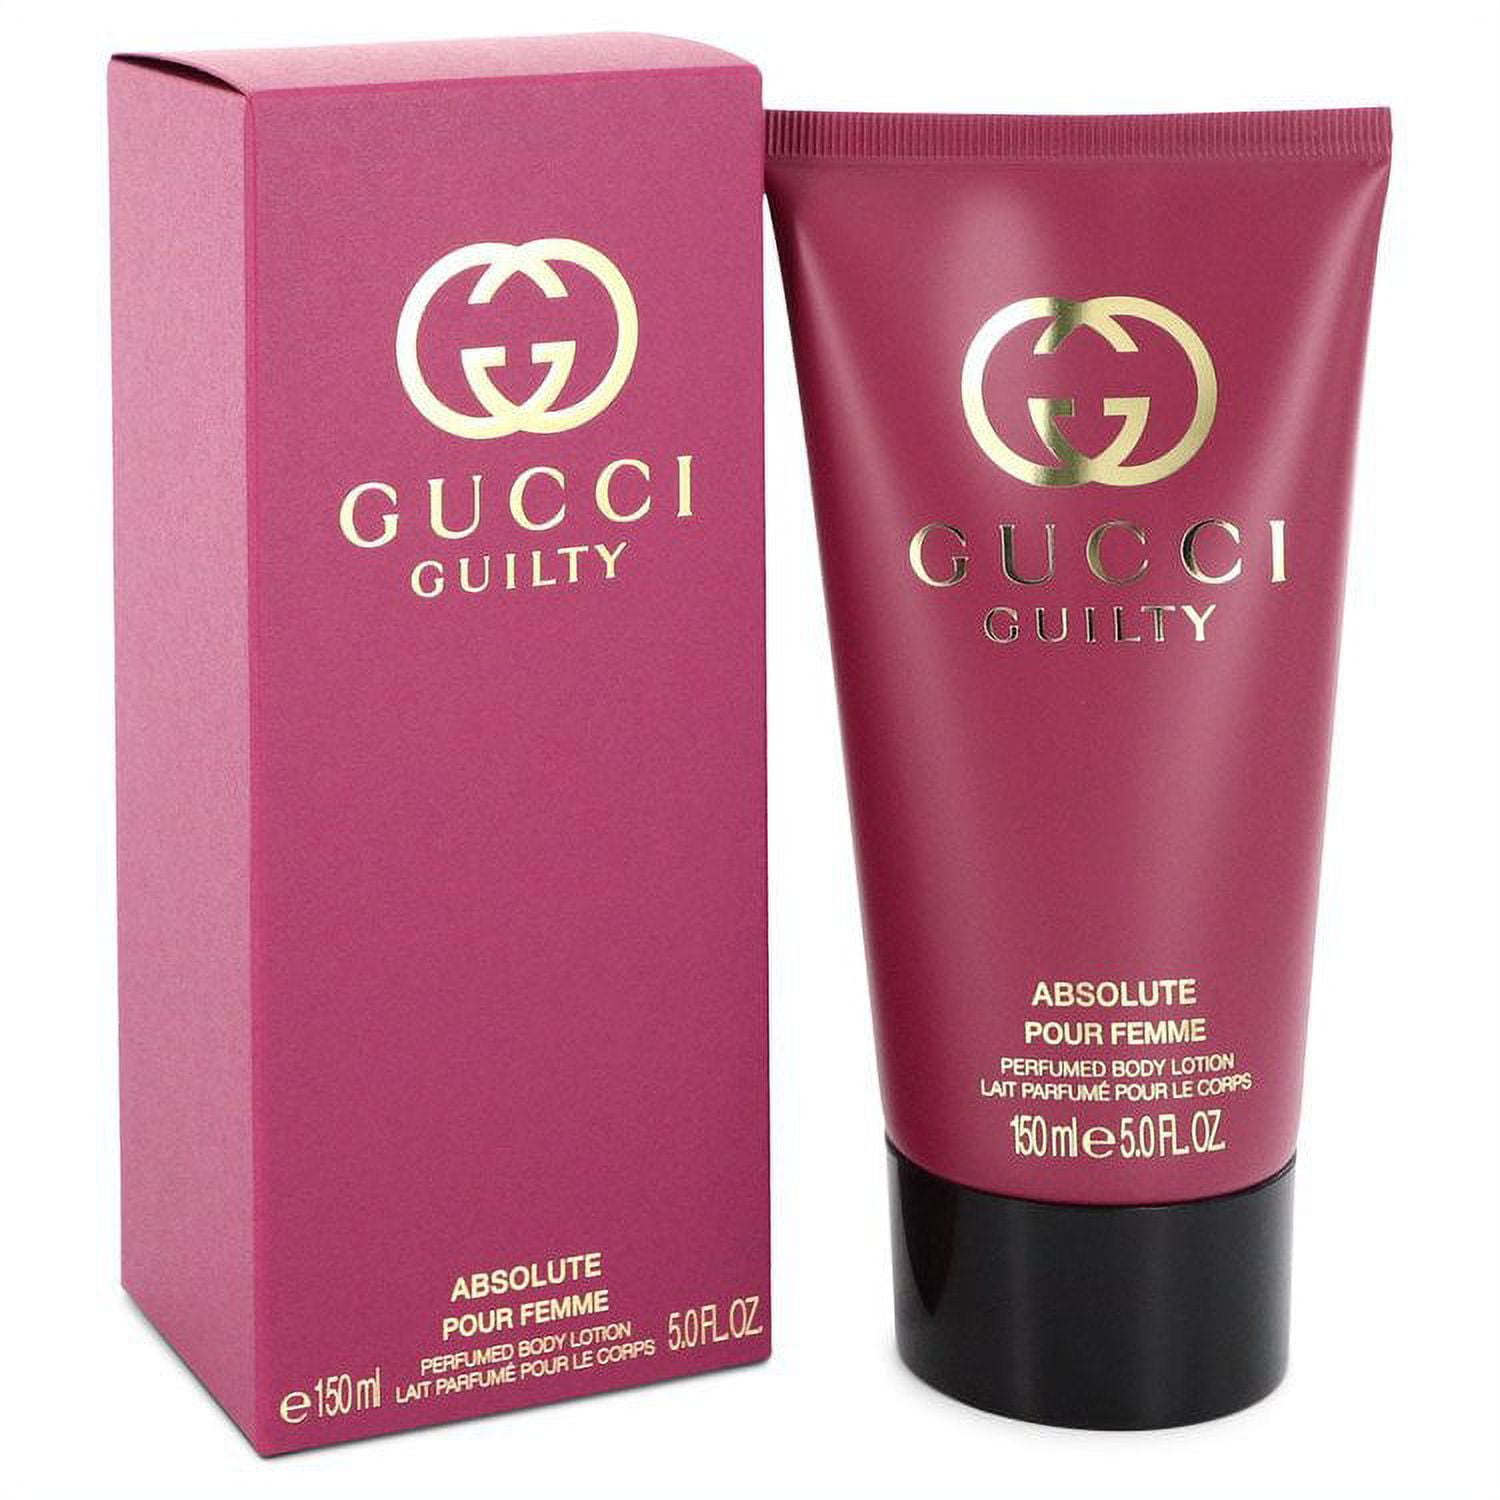 Gucci guilty absolute pour. Gucci guilty Perfumed body Lotion pour femme. Gucci guilty Perfumed body Lotion. Gucci Lotion 2. Гуччи Гилти Абсолют женские.